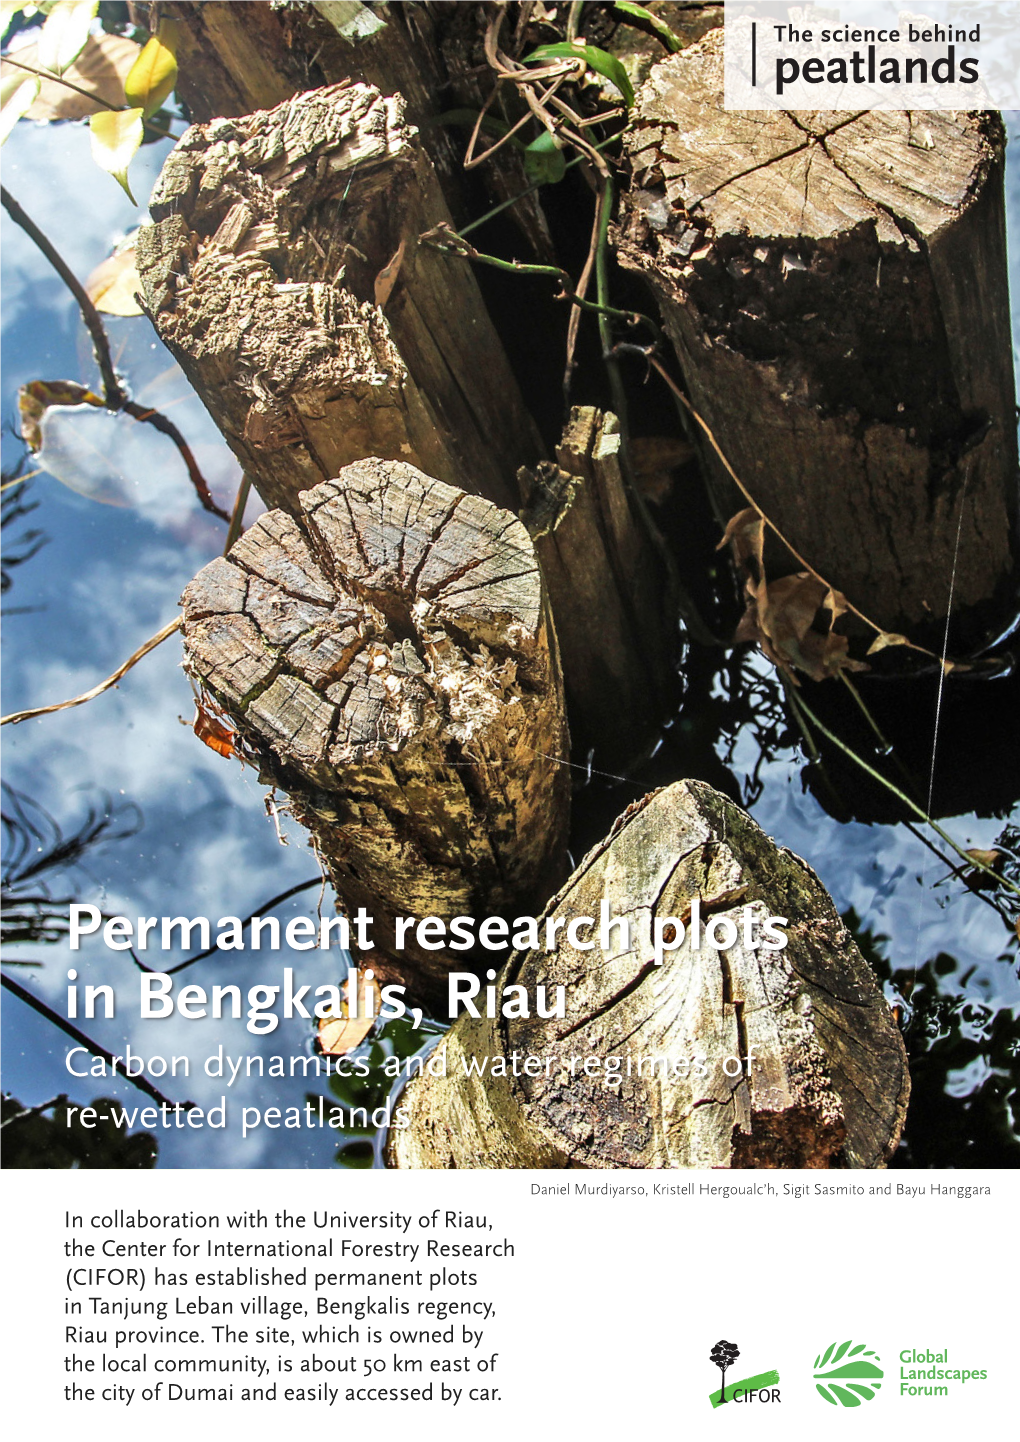 Permanent Research Plots in Bengkalis, Riau Carbon Dynamics and Water Regimes of Re-Wetted Peatlands